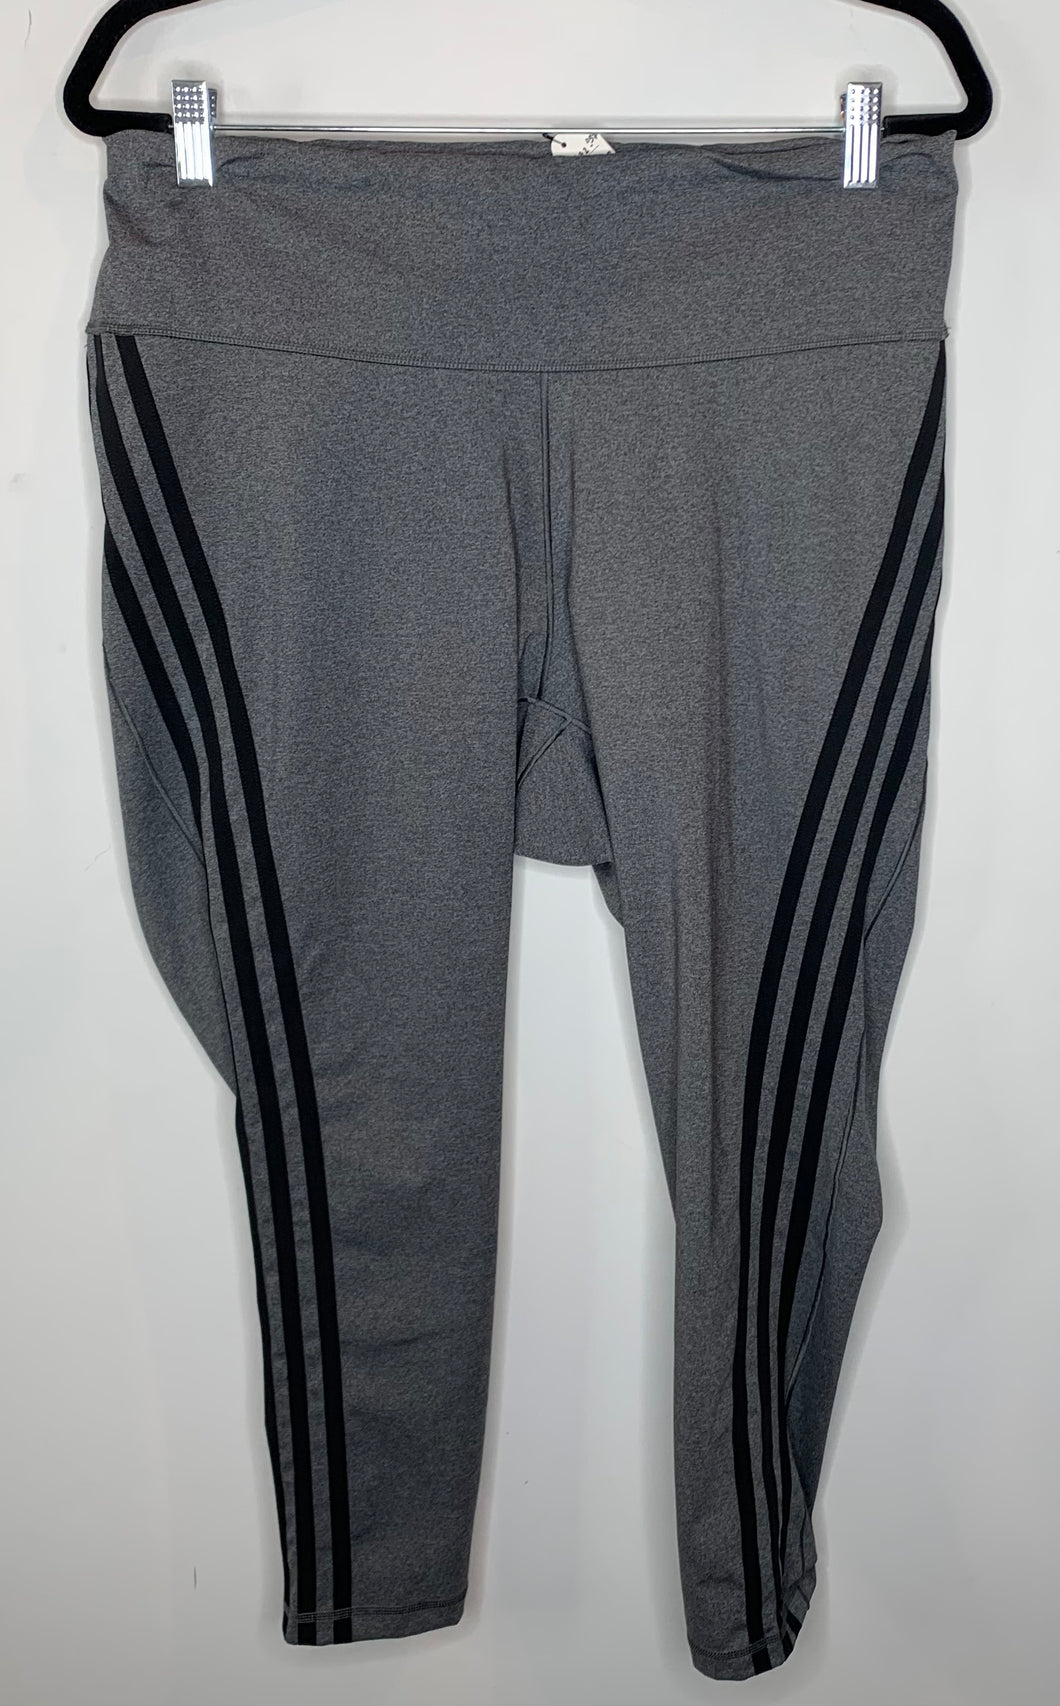 Grey and Black Striped Workout Leggings